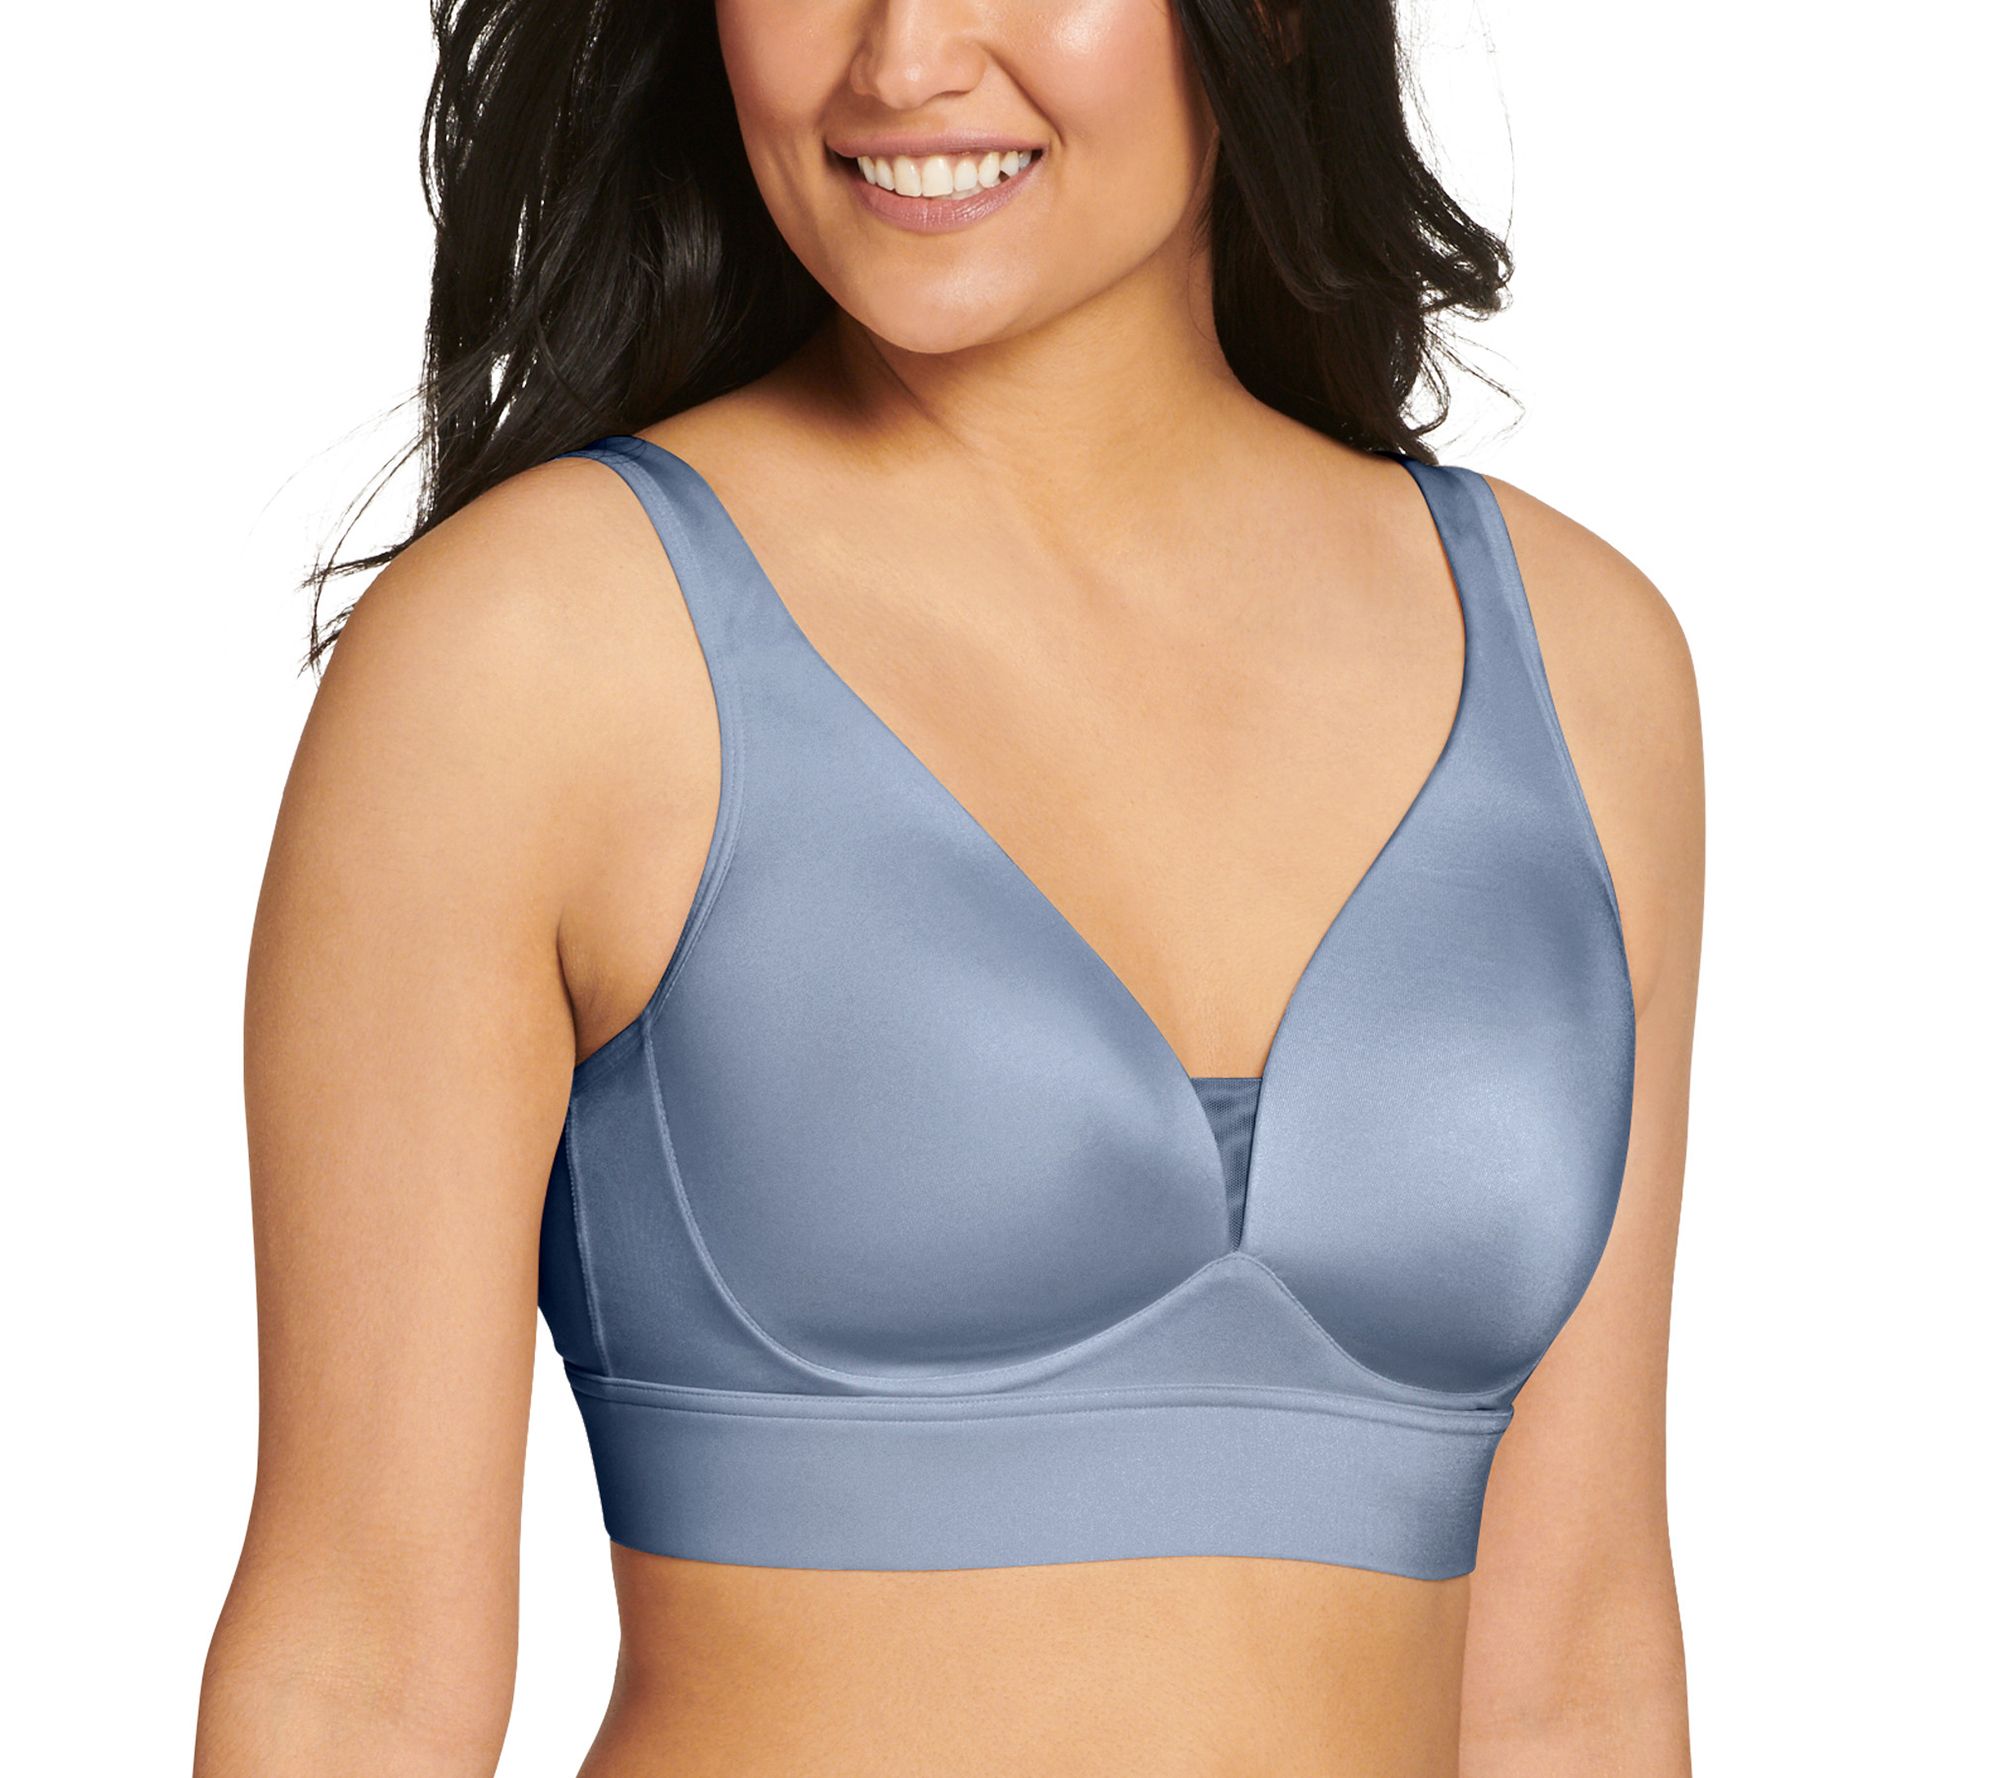 Jockey XL Size Bras Price Starting From Rs 497. Find Verified